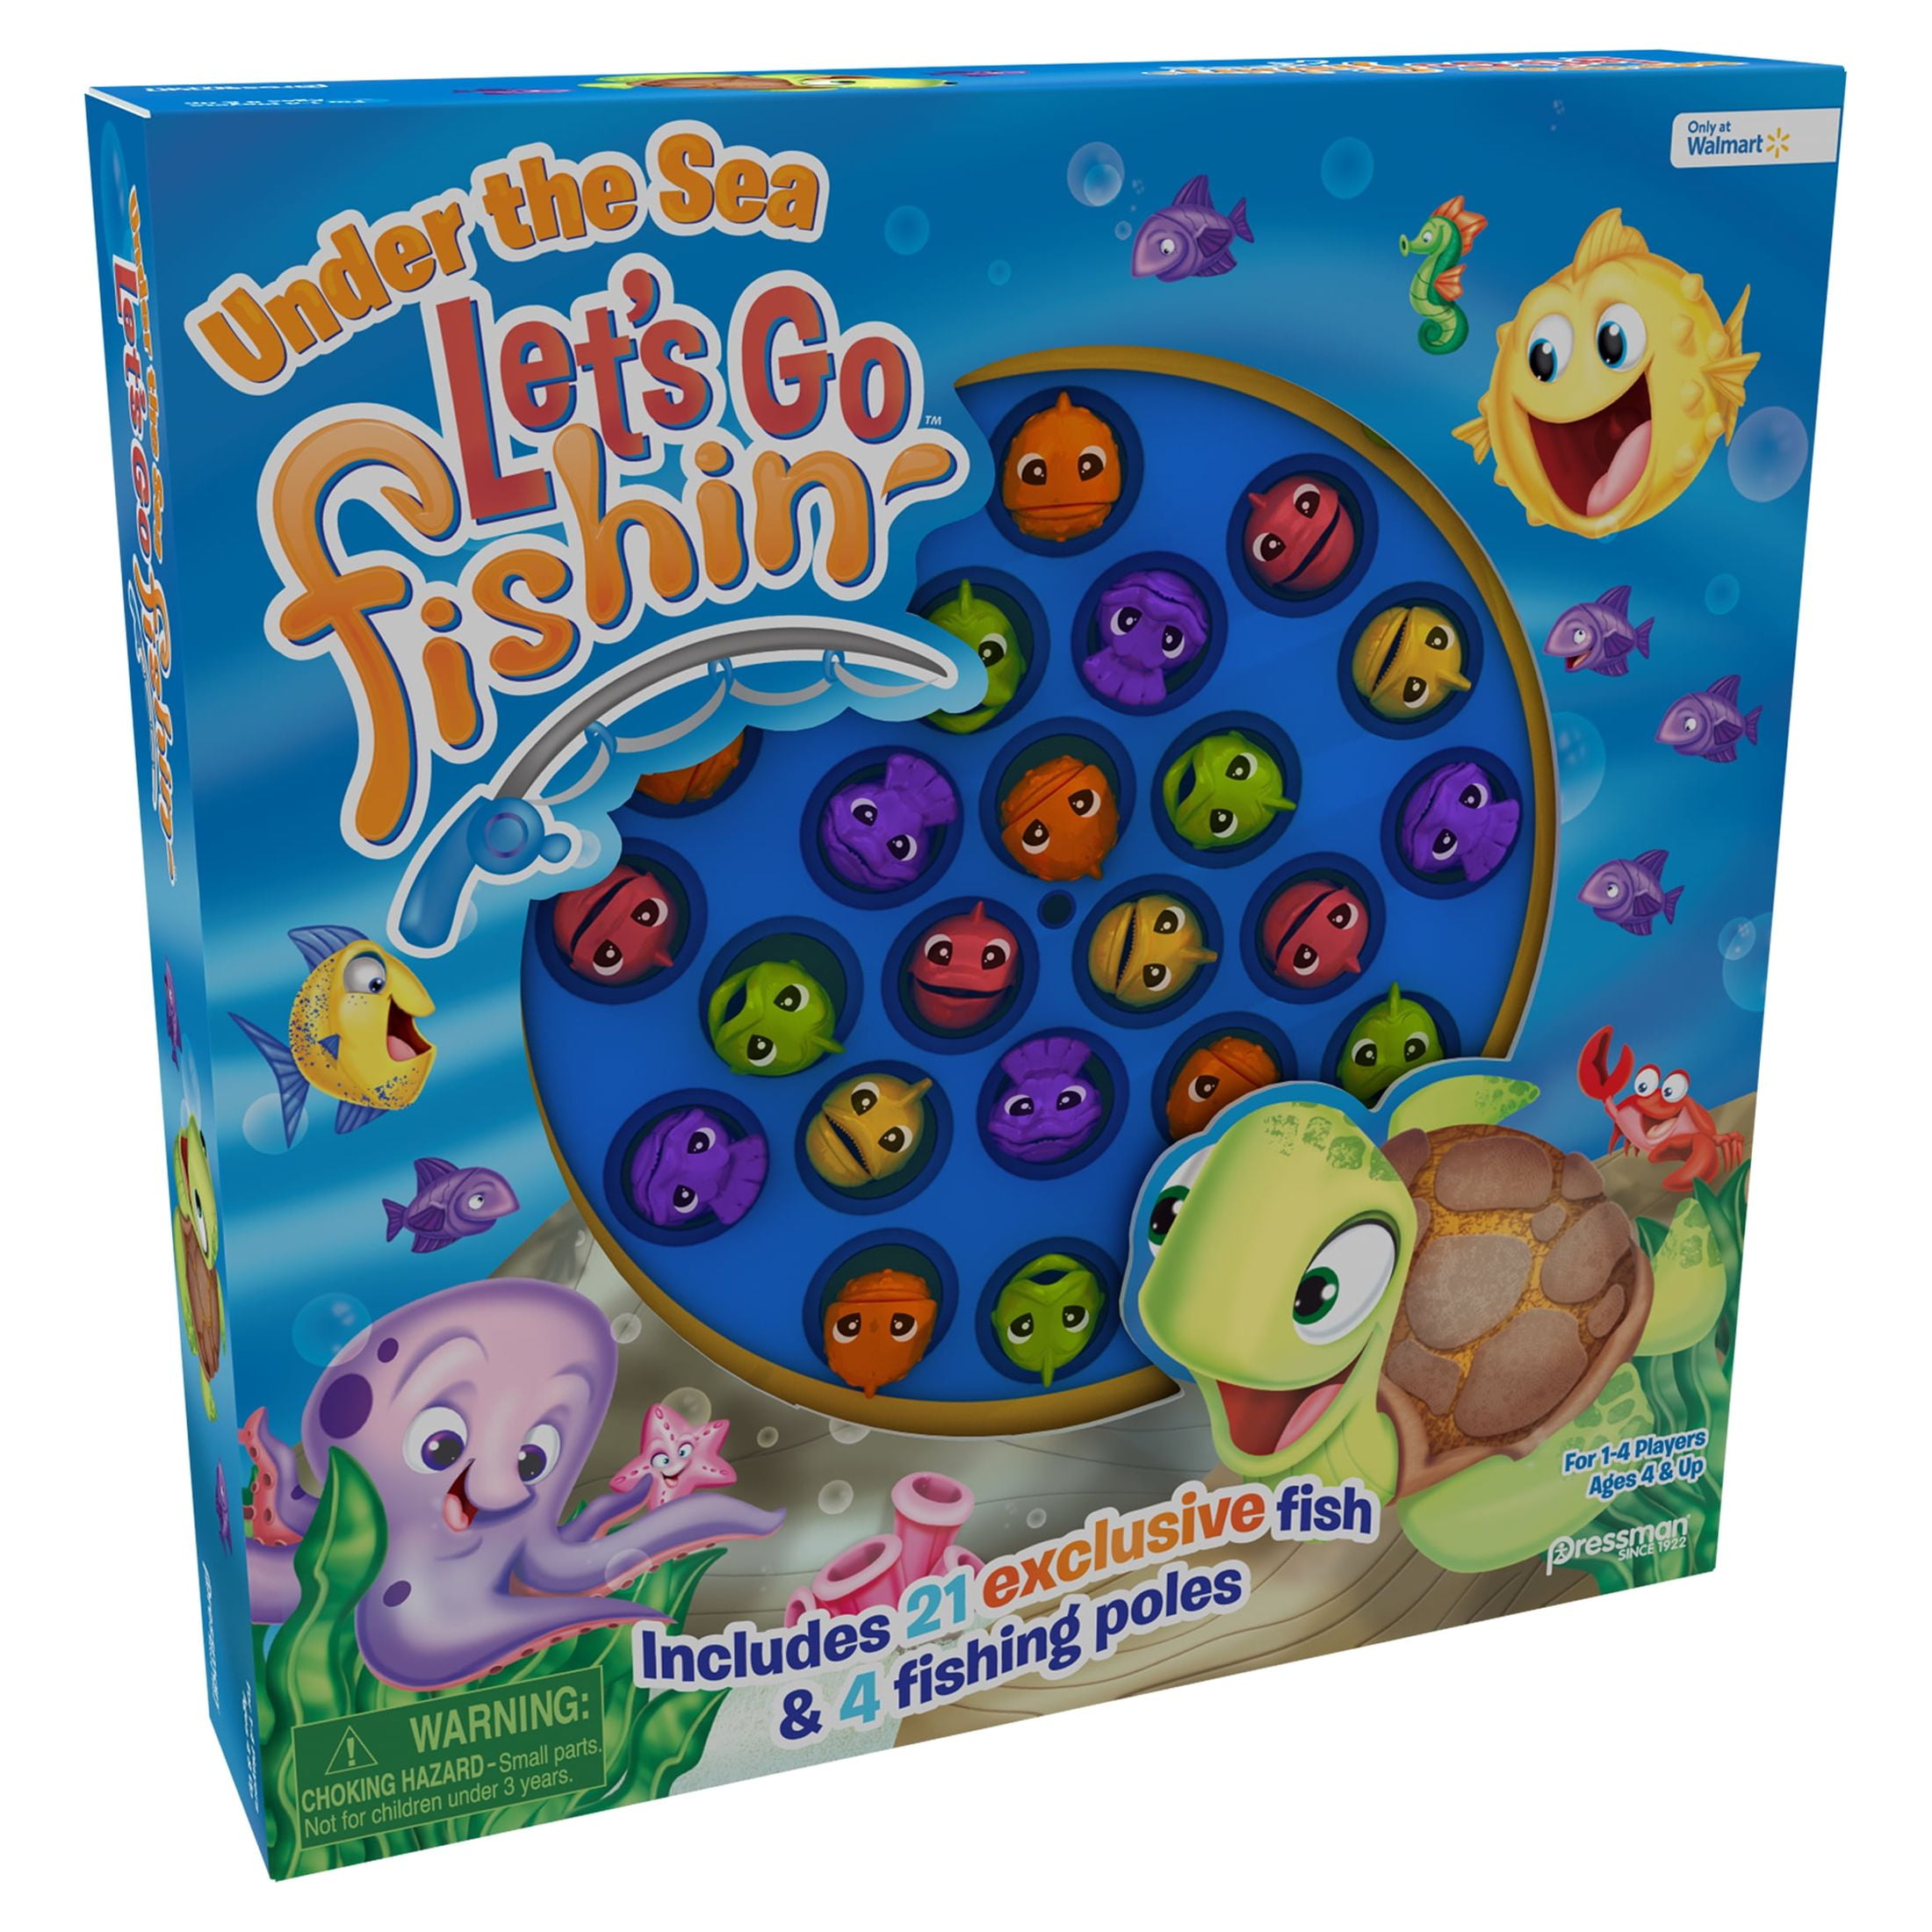 Vintage Let's Go Fishin Game 100% Complete Board Game Toy Fishing